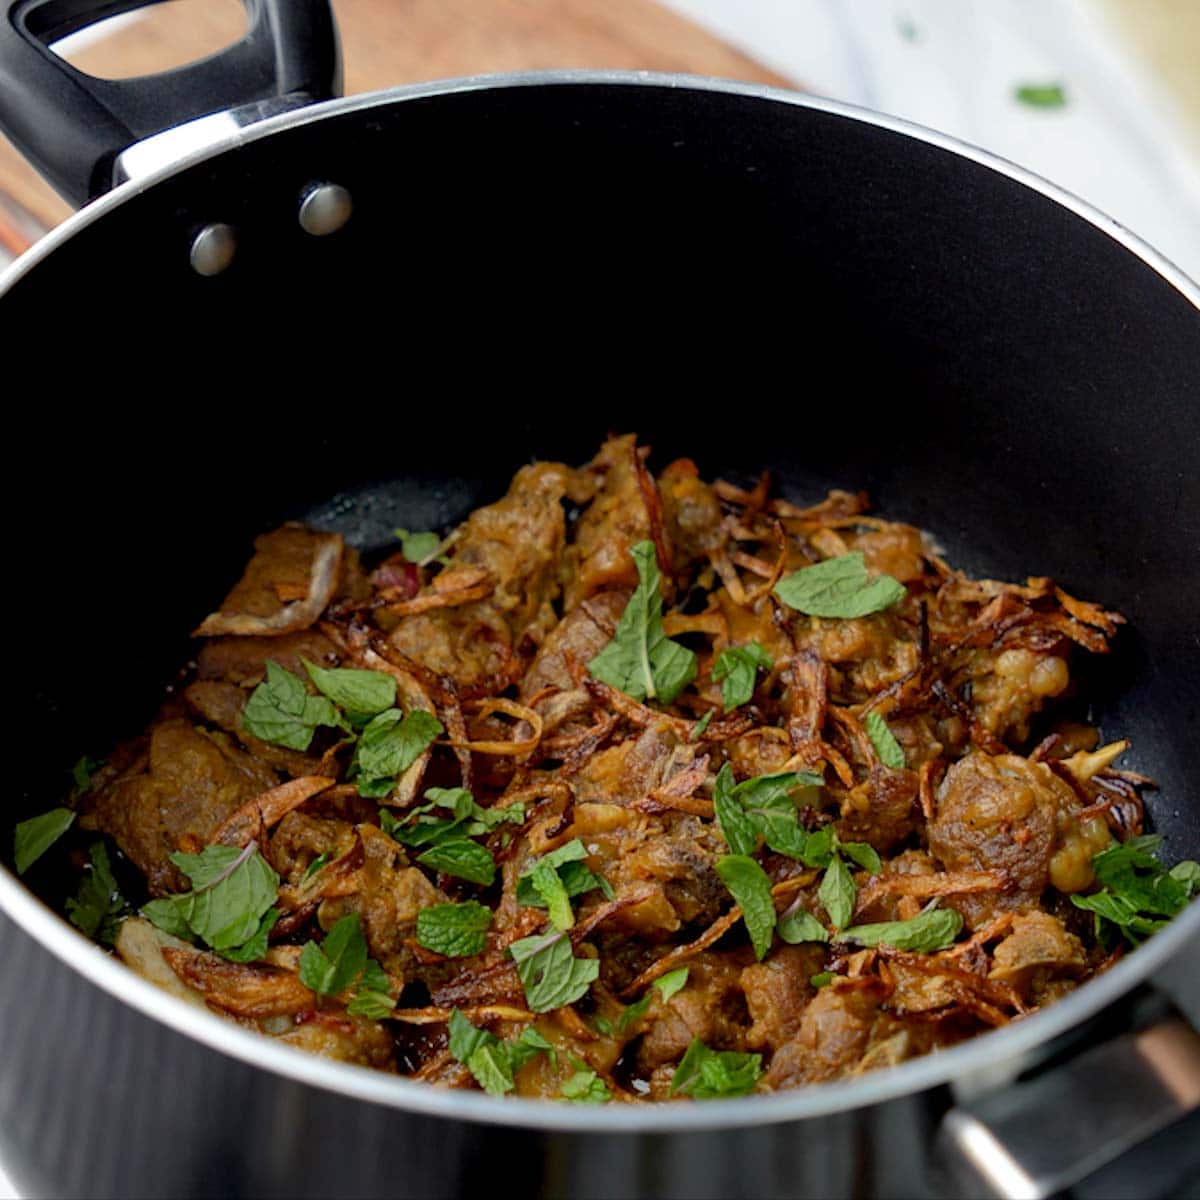 cooked mutton pieces in a pan garnished with mint leaves